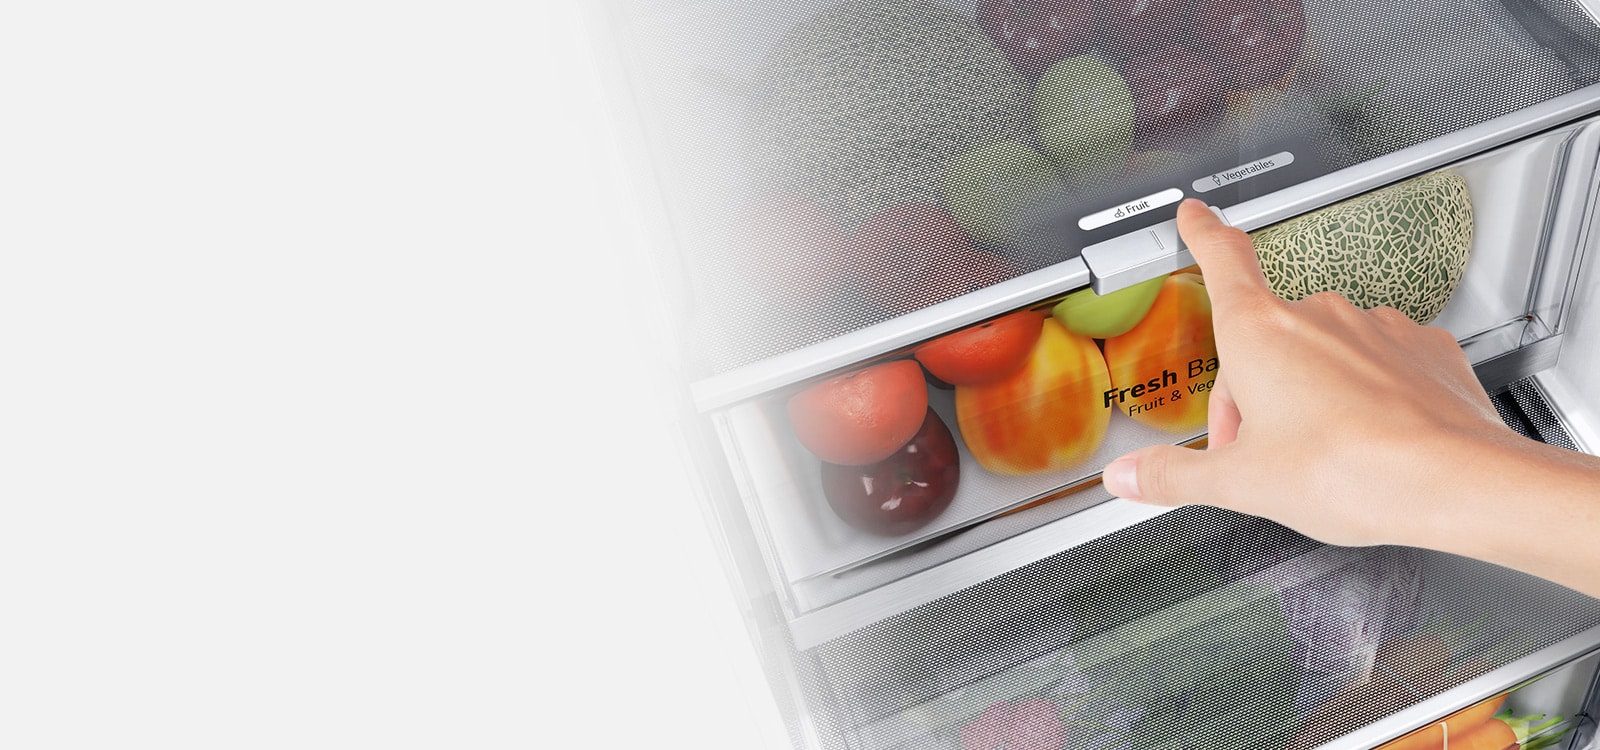 The bottom drawers of the fridge are filled with colorful fresh produce. An inserted image magnifies the control lever to choose the optimal humidity level to keep produce fresh.